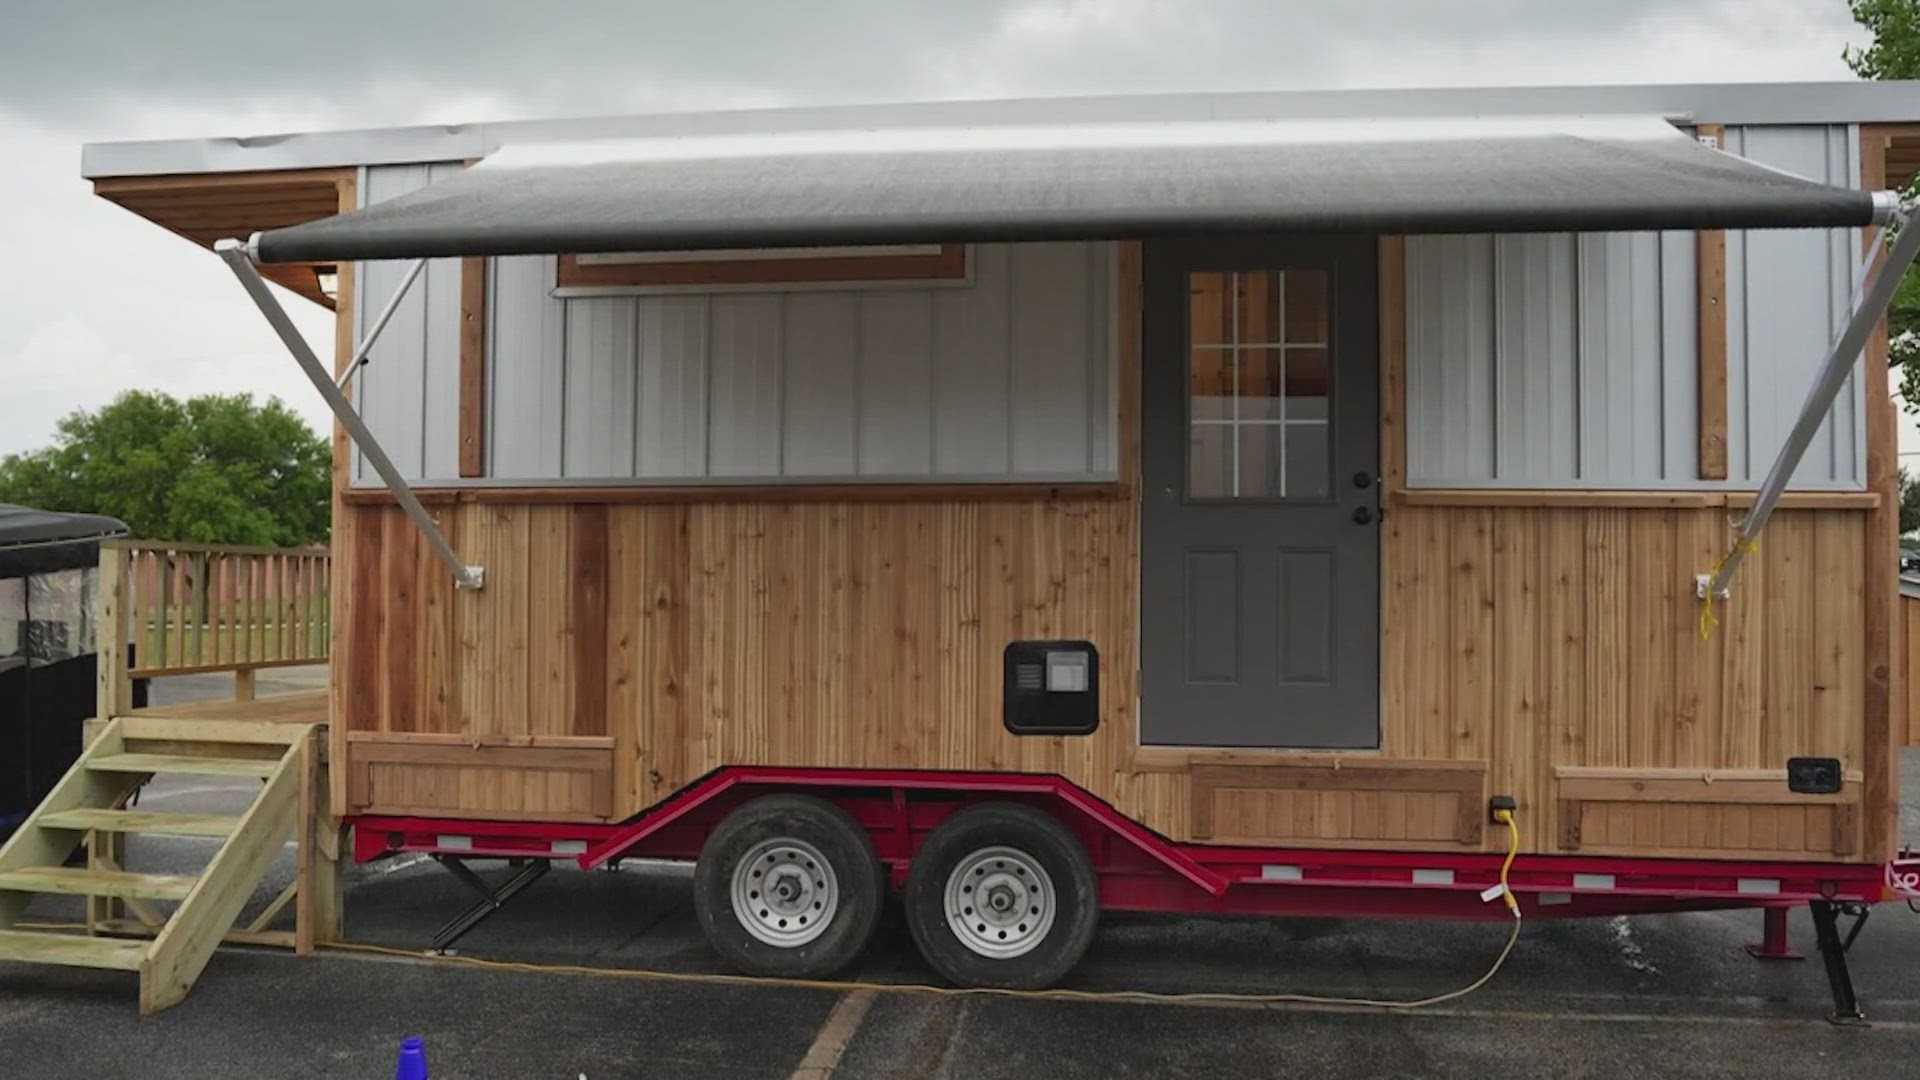 The tiny home features a full-size shower, residential toilet, a full-size Murphy bed, microwave, three burner cooktop, oven, refrigerator, A/C, and (a little) more!